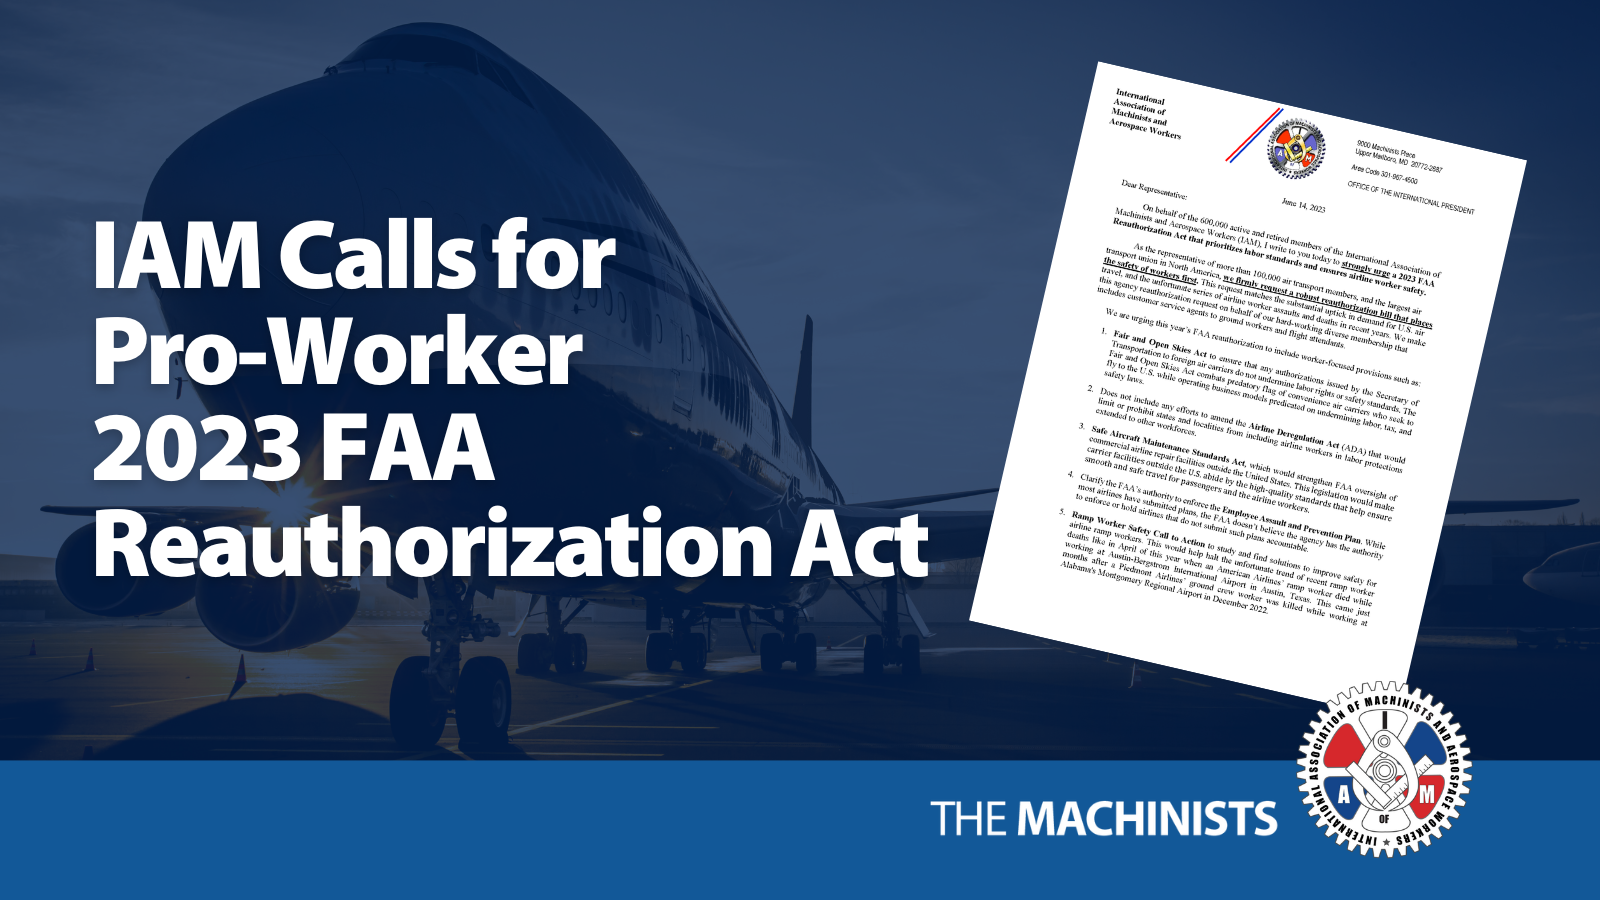 IAM Urges Members of Congress for FAA Reauthorization that Prioritizes Worker Safety, Labor Standards